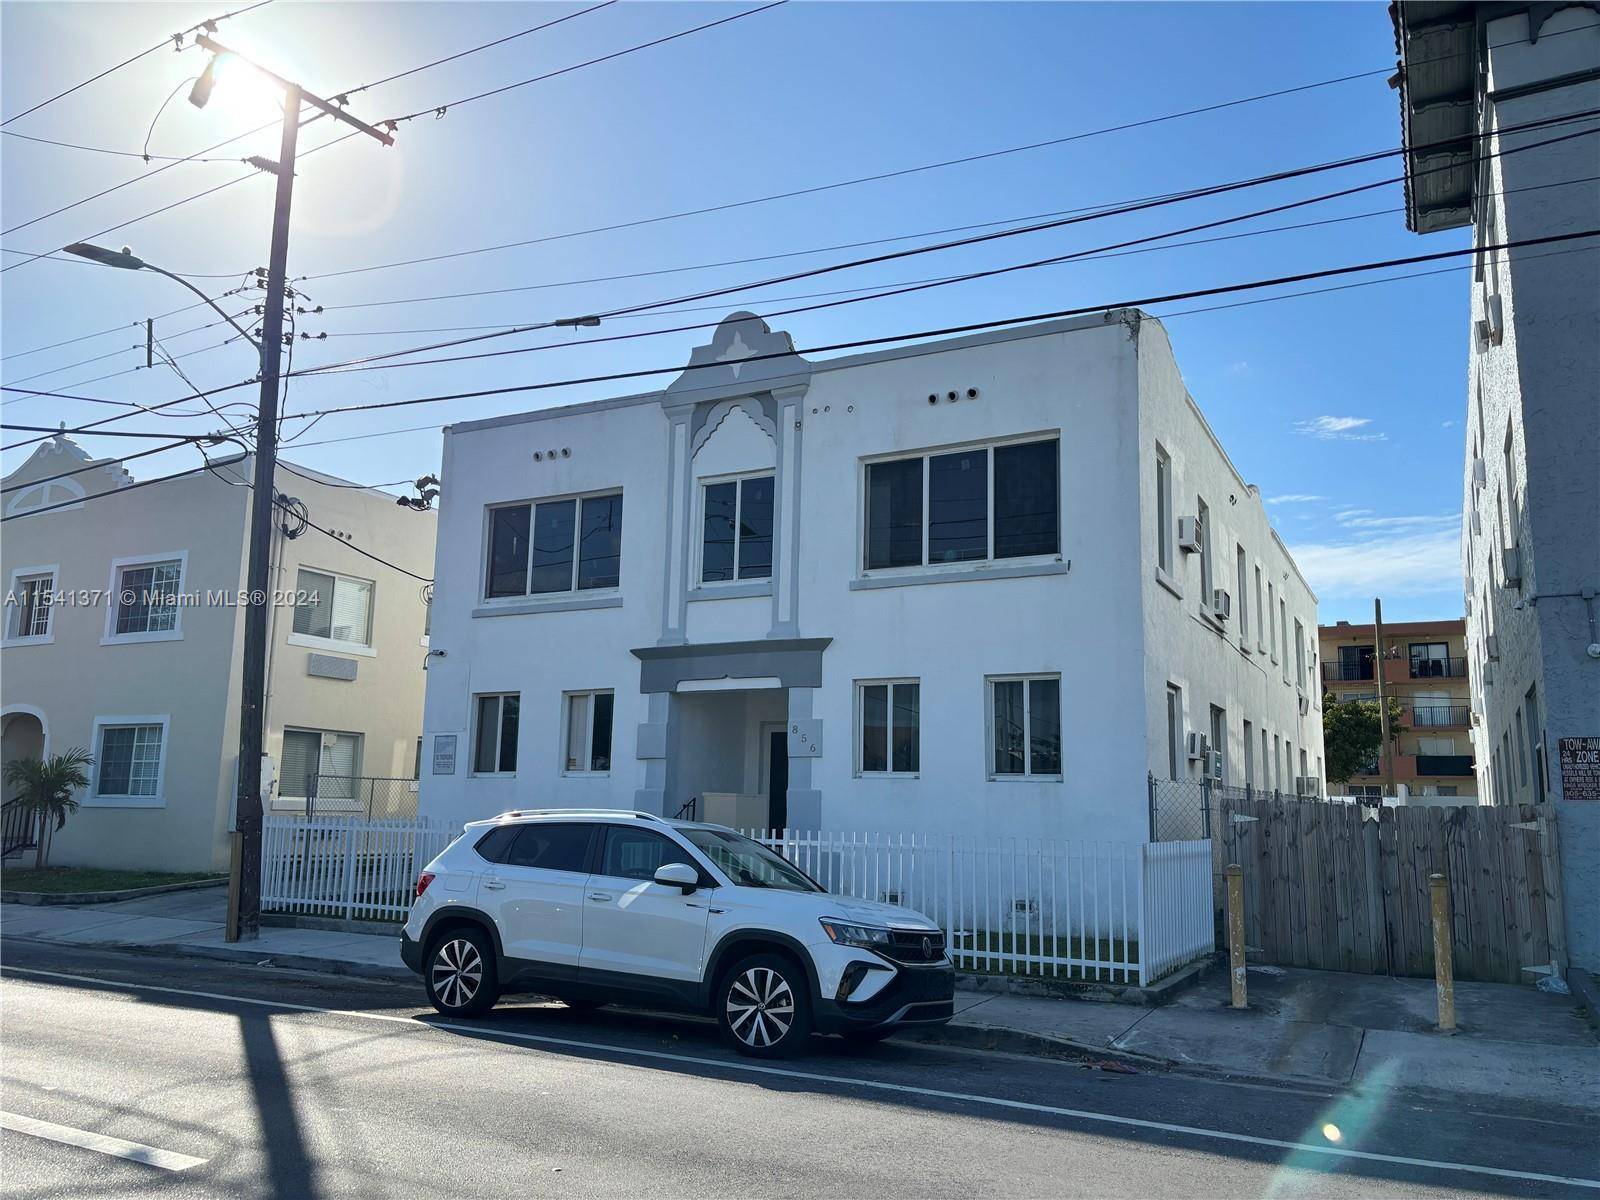 The Porosoff Group is pleased to offer for sale 856 SW 6th Street.